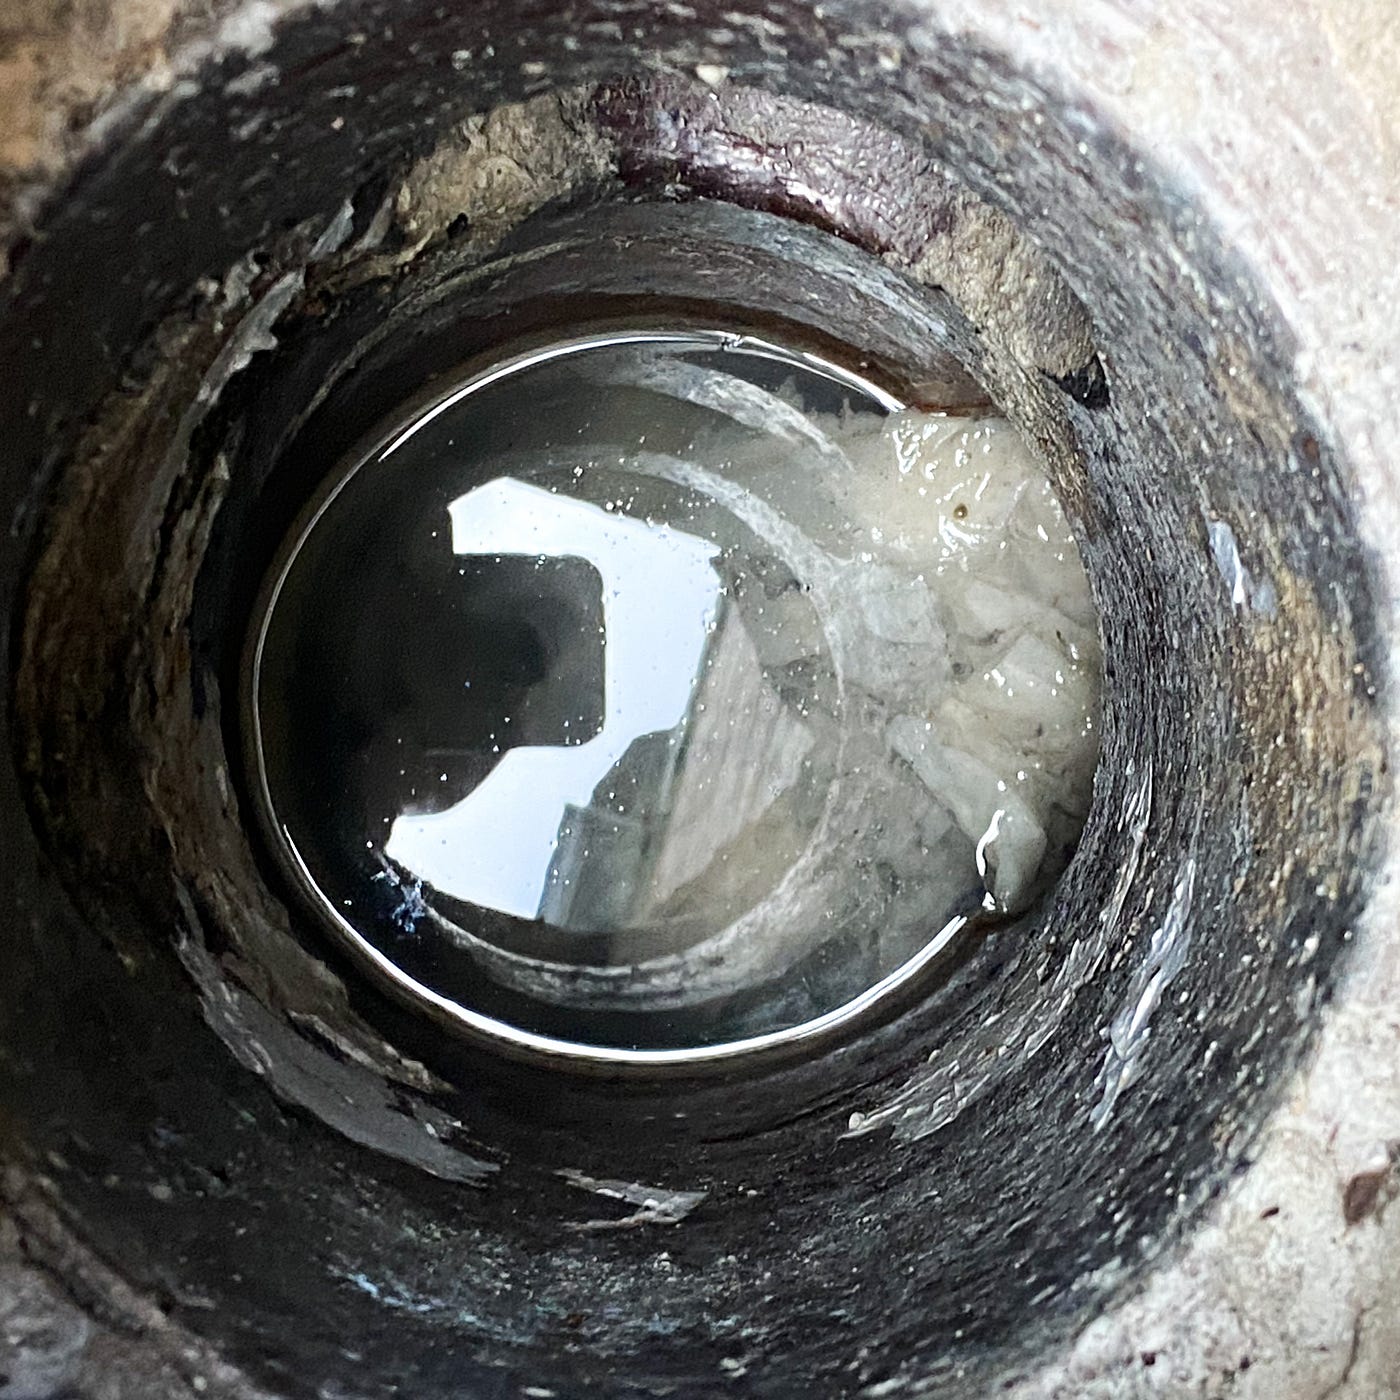 IMPROPER USE OF WET WIPES AND OTHER MATERIALS ARE RAISING SEWER